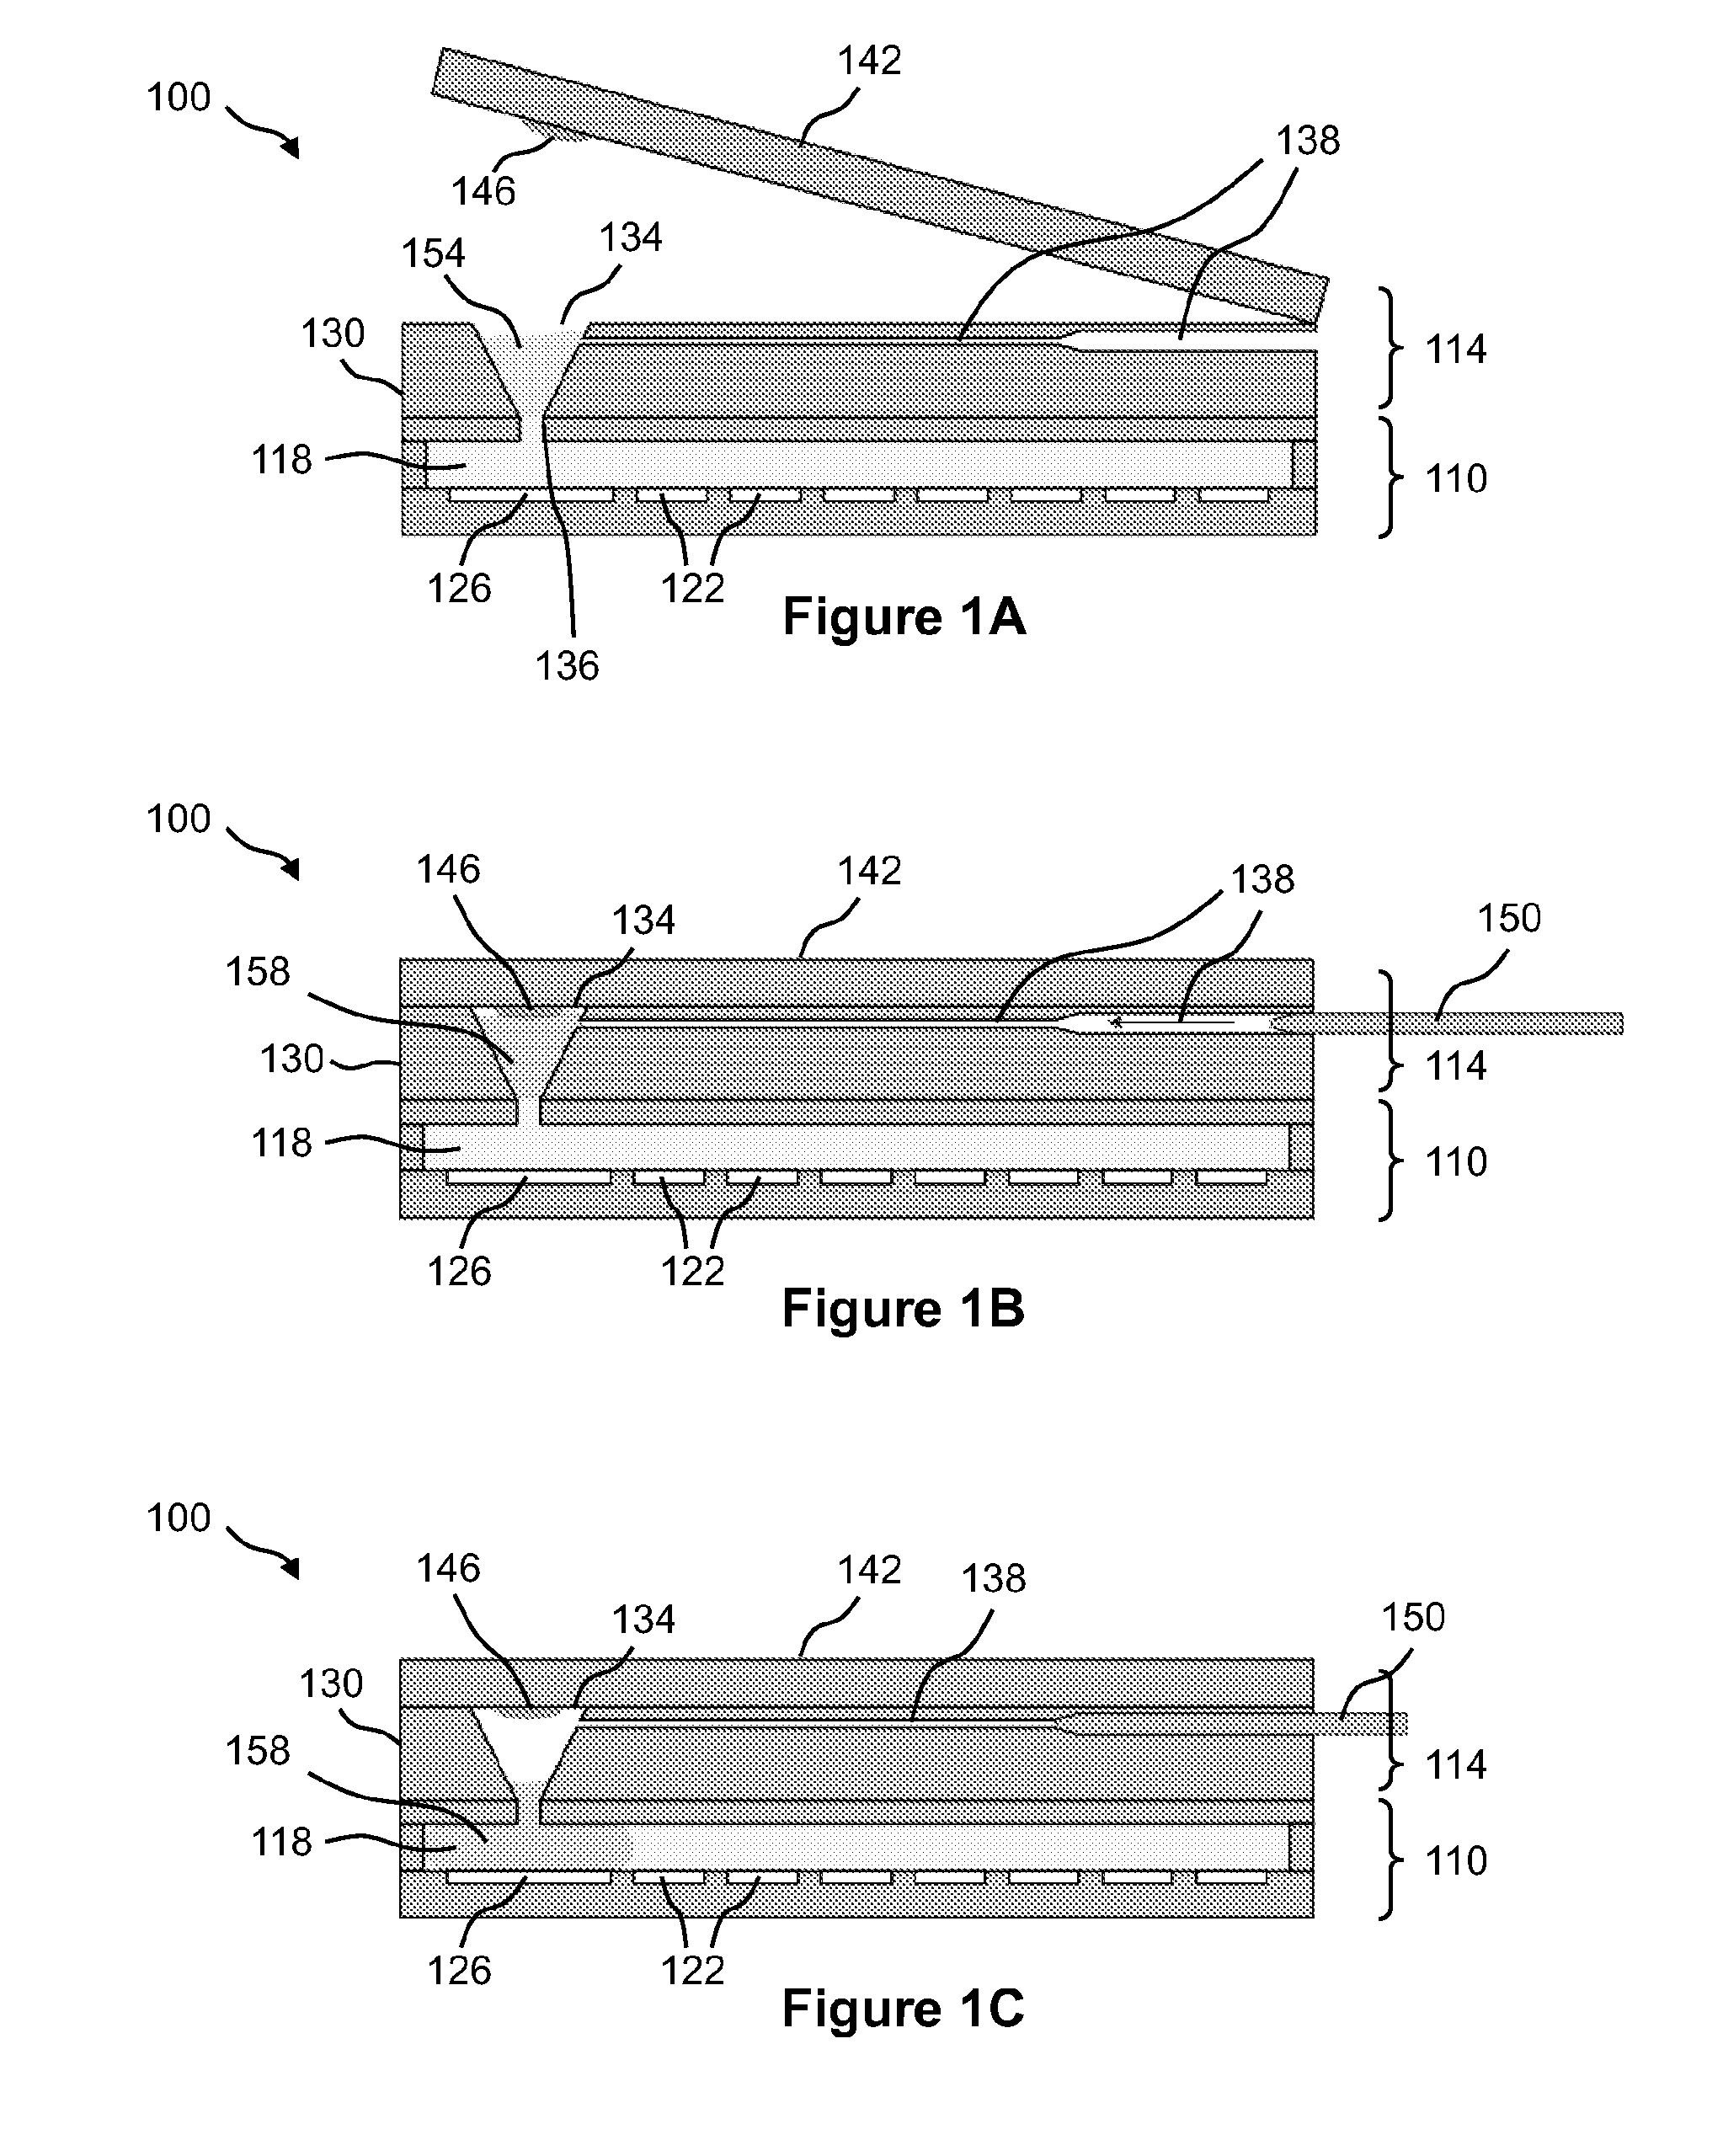 Reagent Storage and Reconstitution for a Droplet Actuator